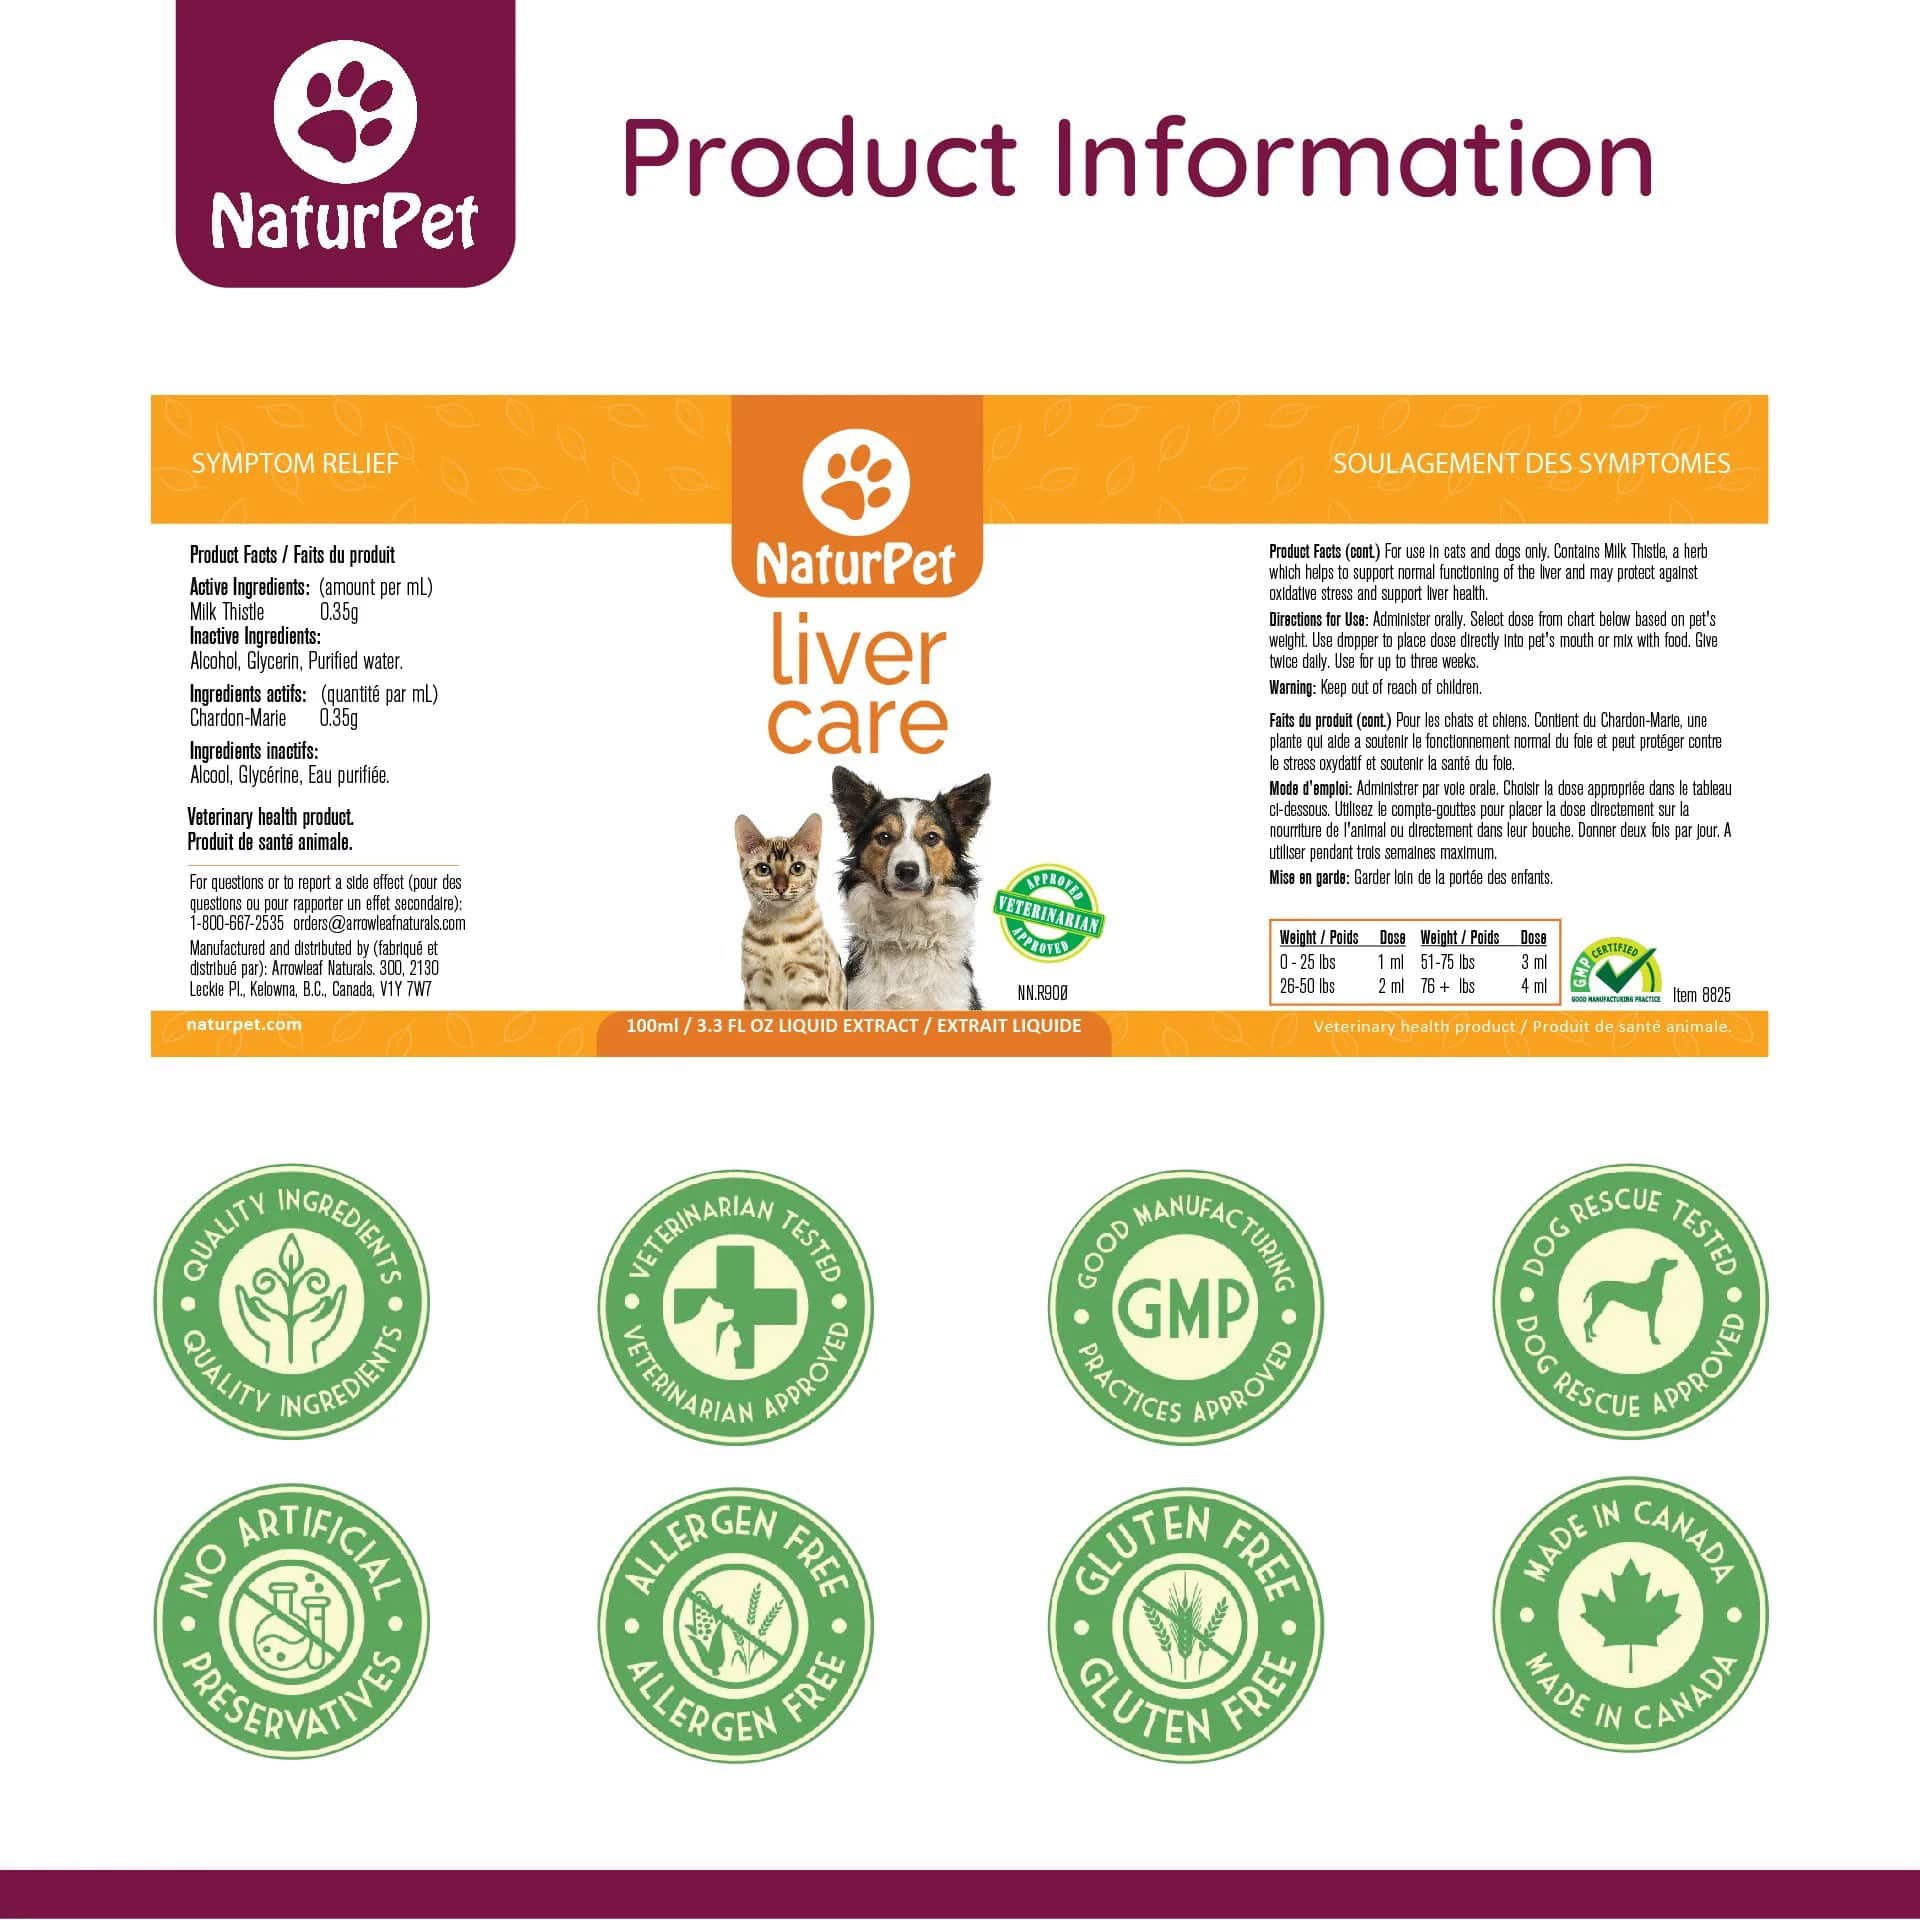 NaturPet Liver Care - With Milk Thistle Product Information